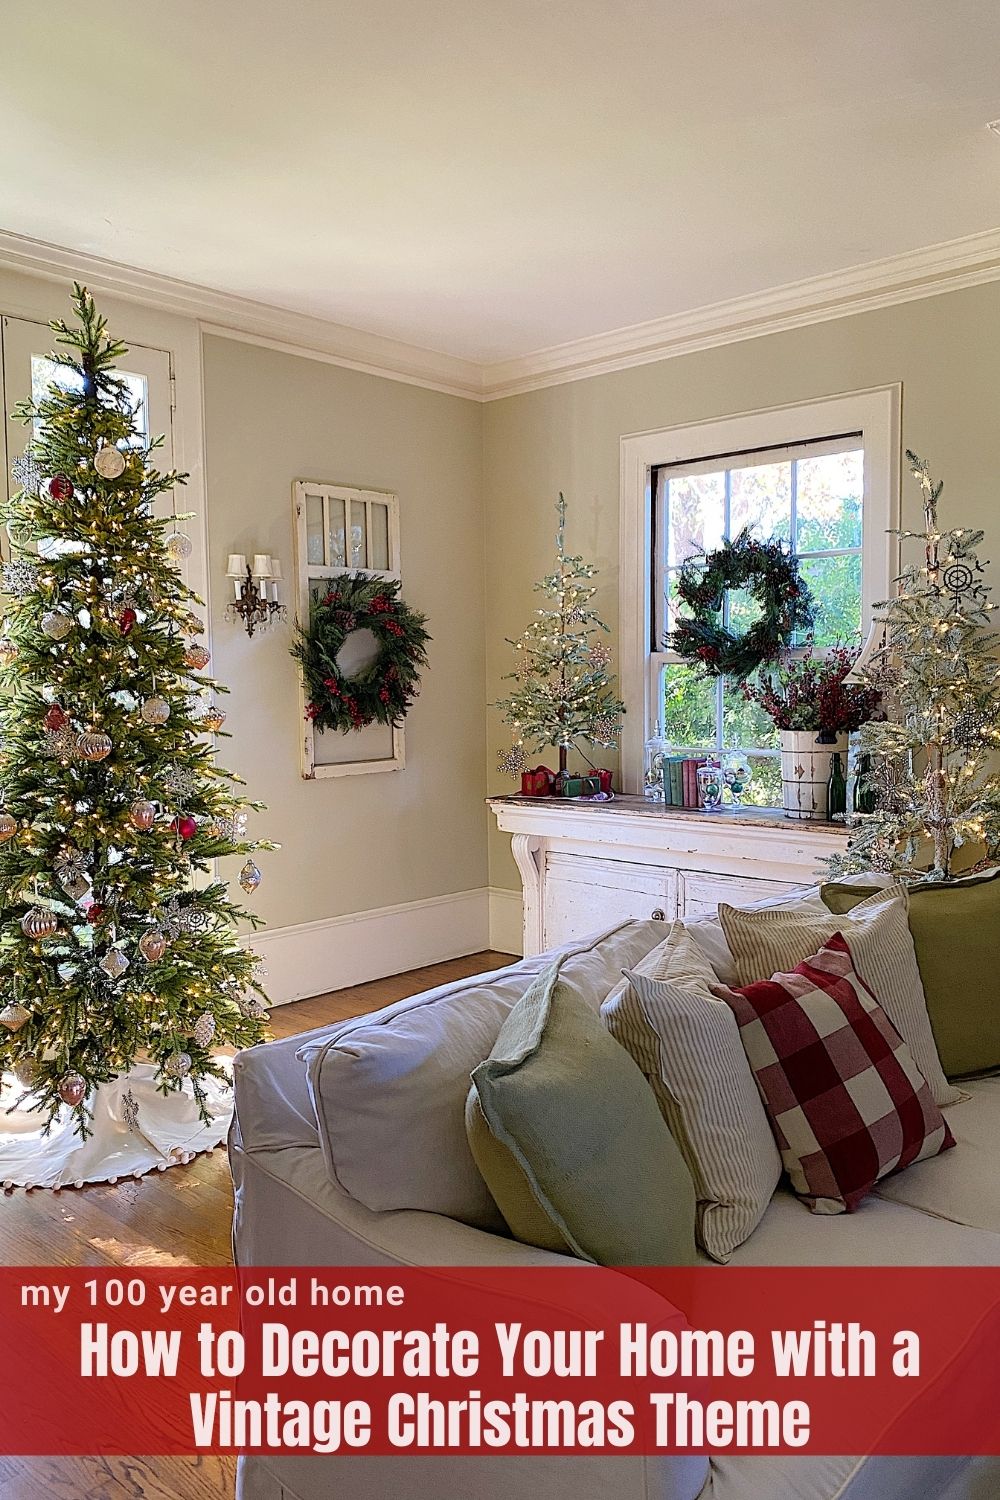 I created the most amazing vintage Christmas look with a Balsam Hill tree, Balsam Hill ornaments, four Balsam hill wreaths, and a Balsam Hill garland.